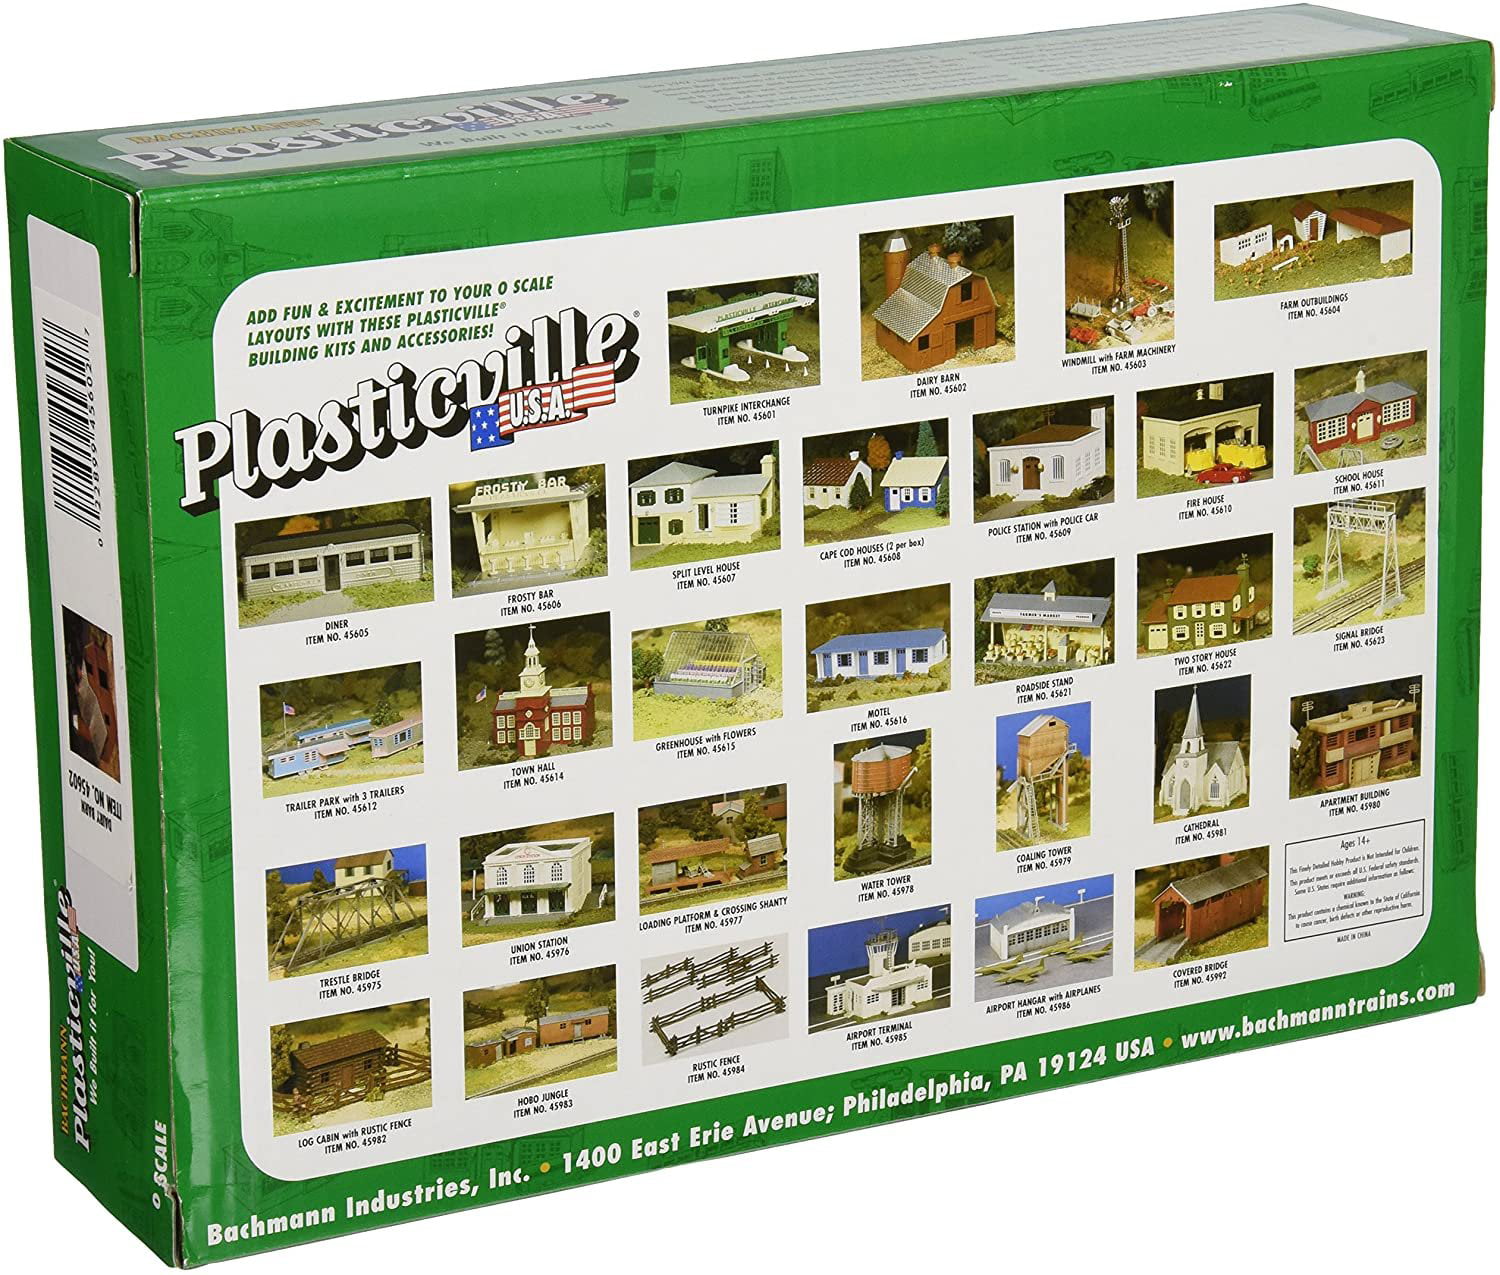 R CLASSIC KITS PLASTICVILLE U.S.A. WATER TOWER 